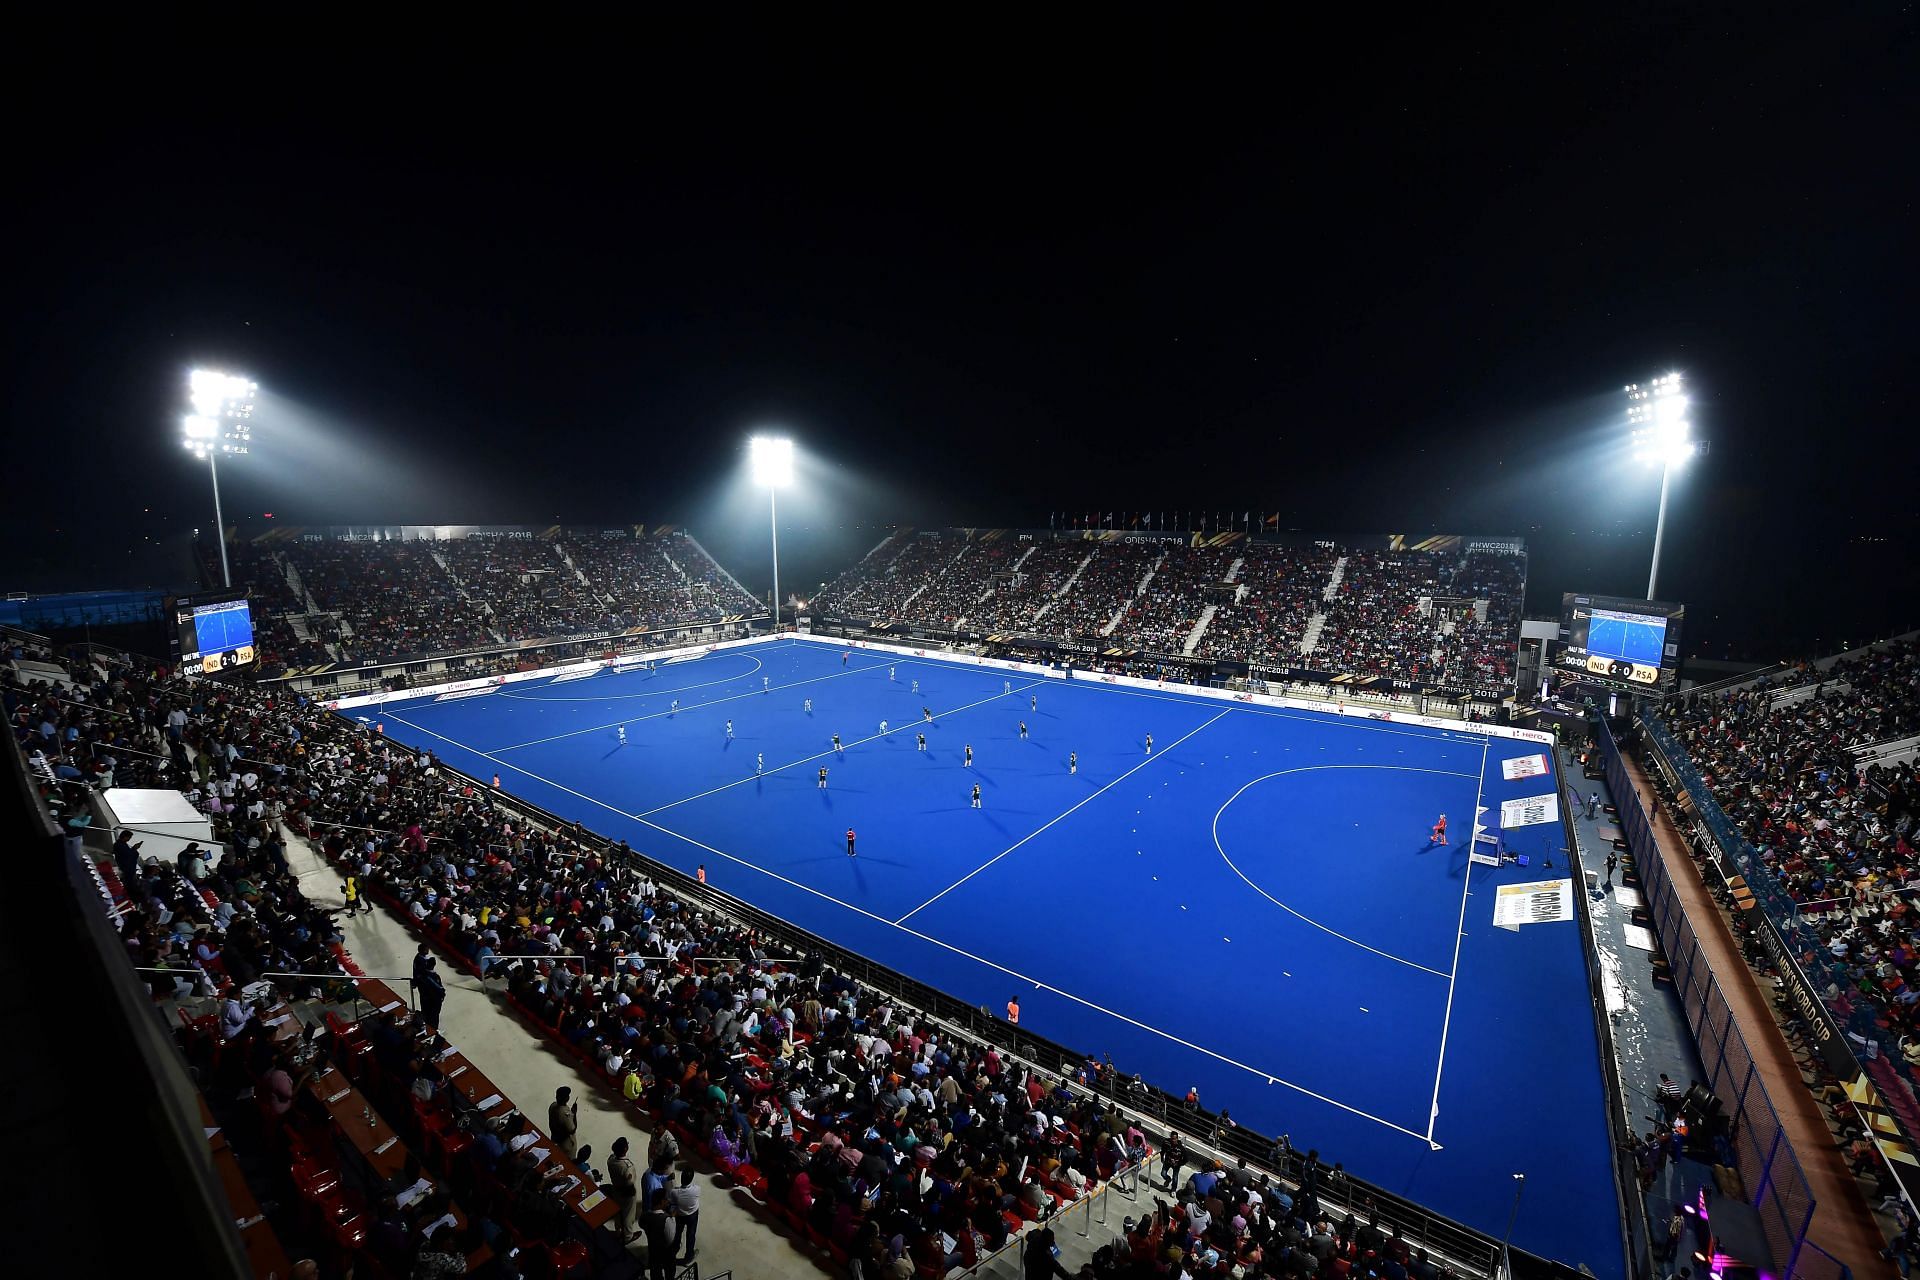 A general view of the Kalinga Stadium in Bhubaneshwar. (PC: Getty Images)